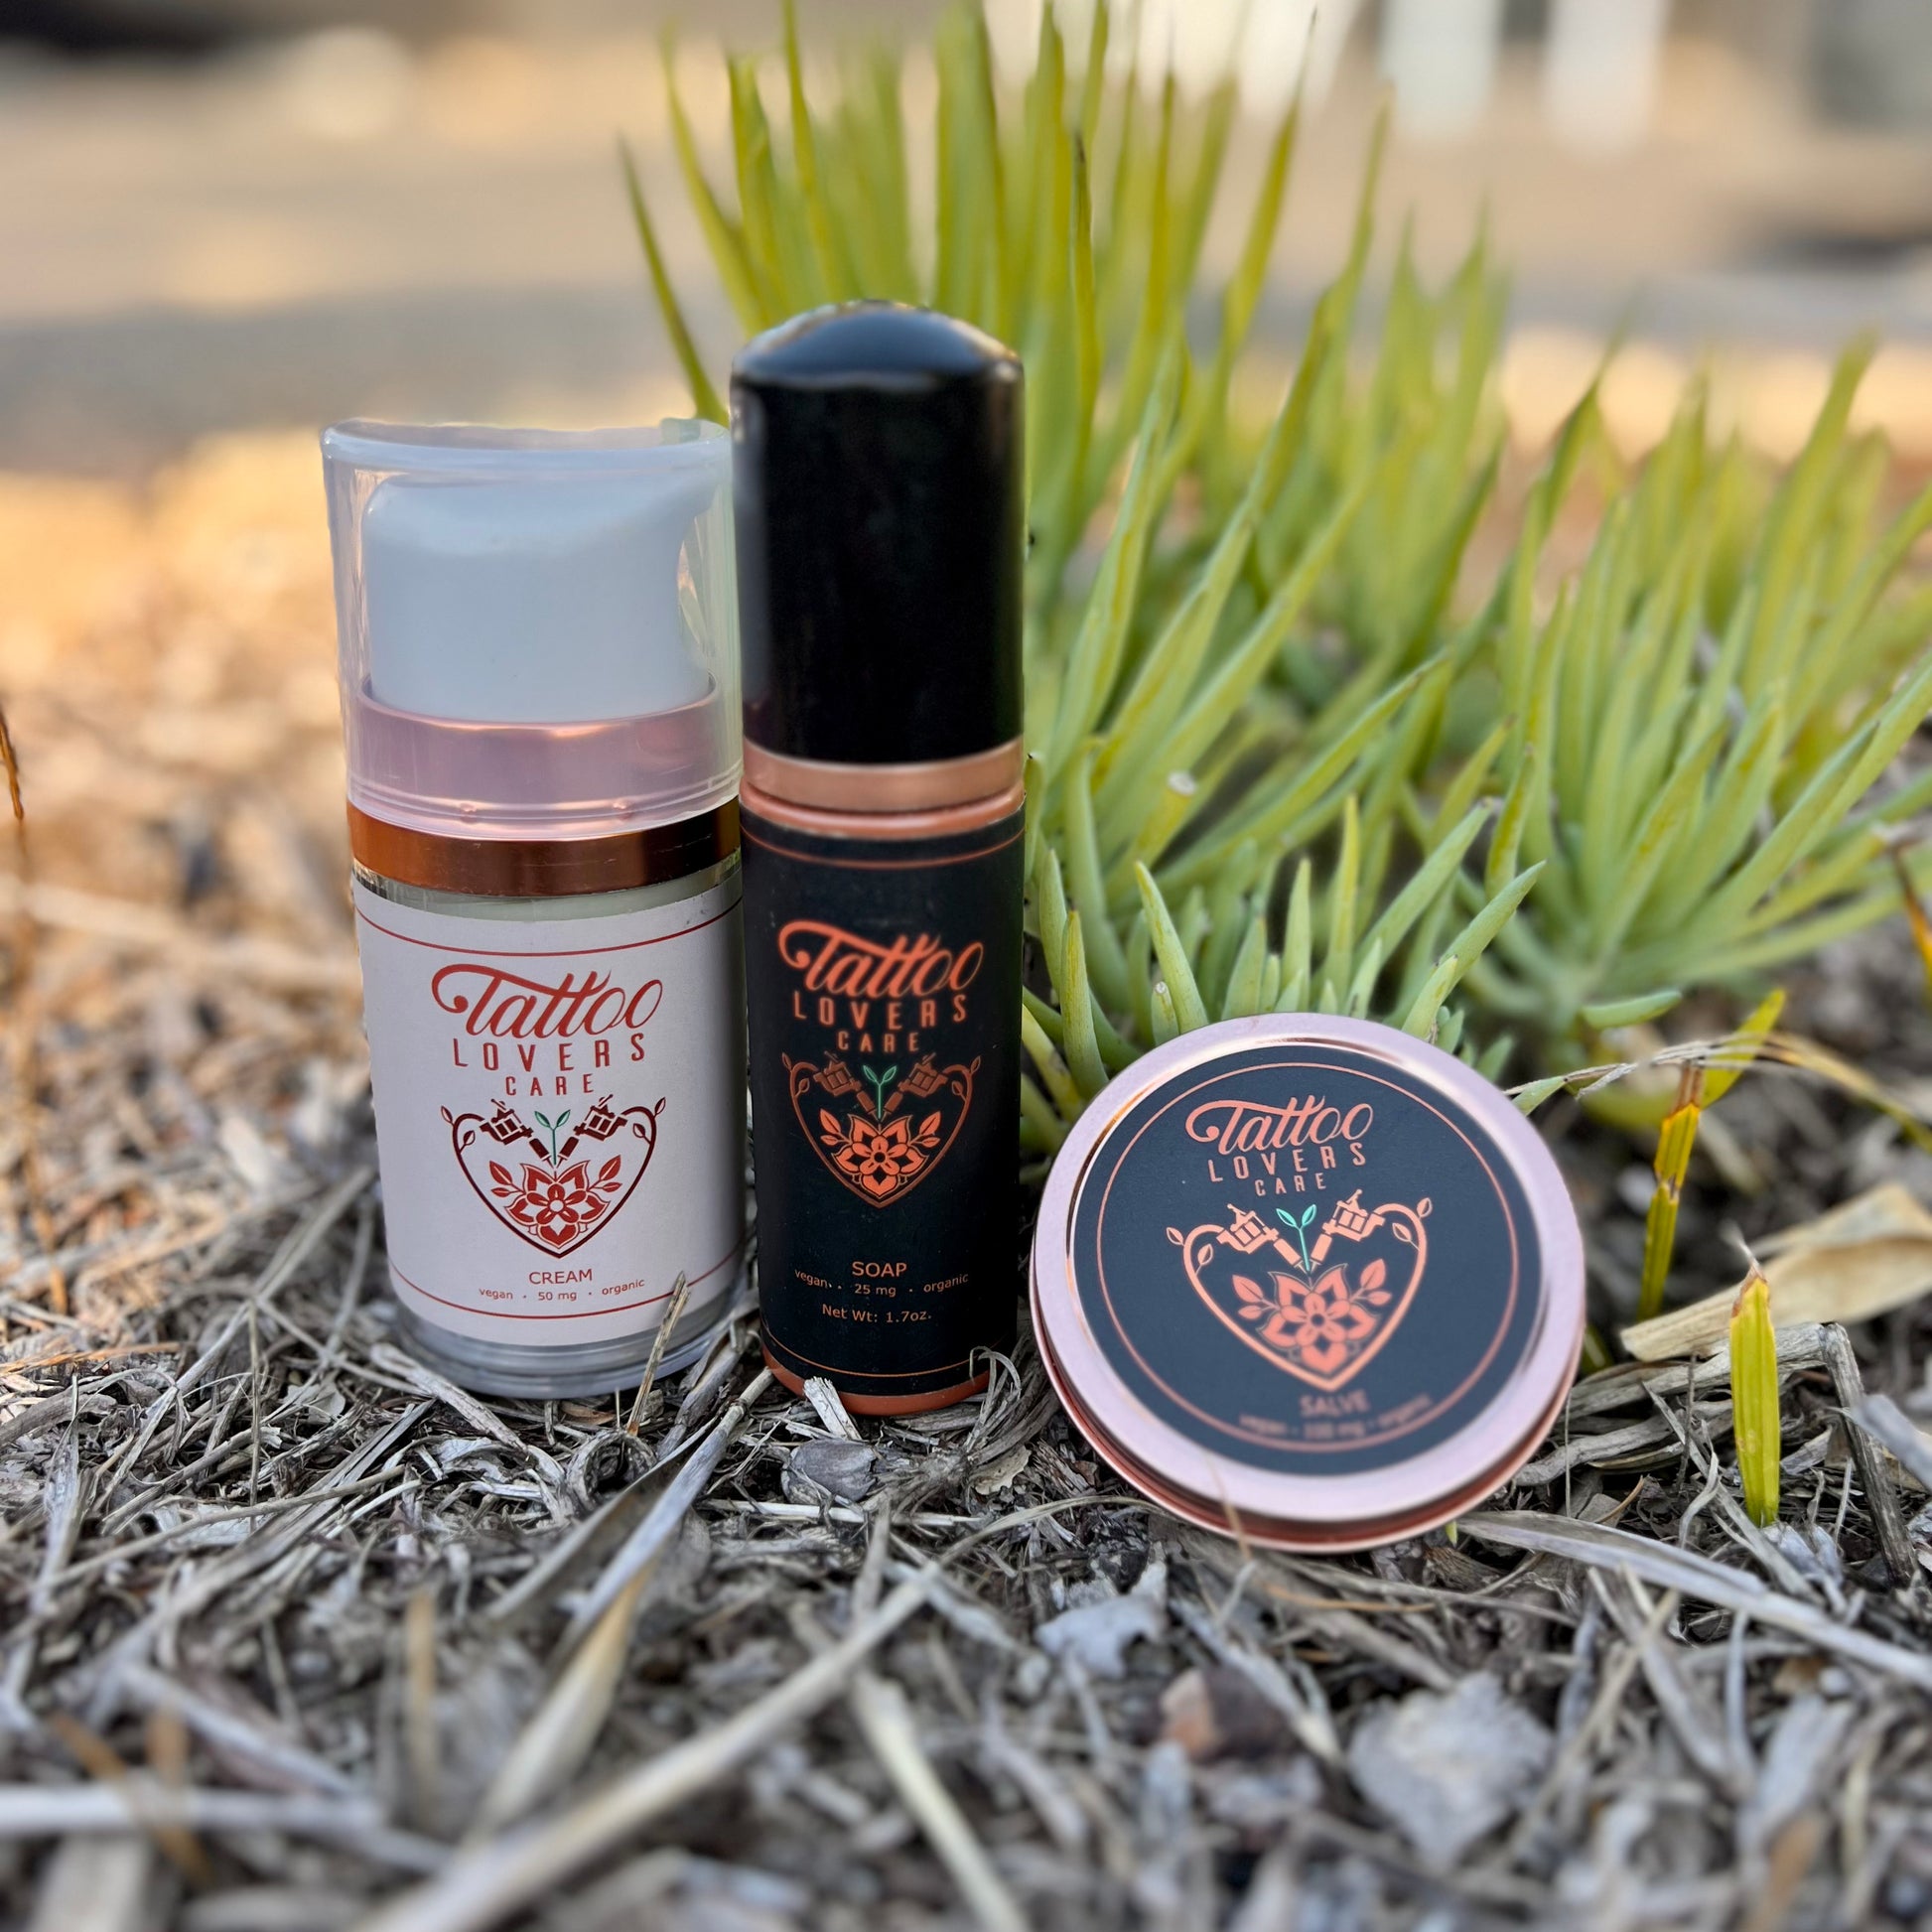 tattoo lovers package of three items on display outdoors. 100% organic ingredients with CBD. Superior quality